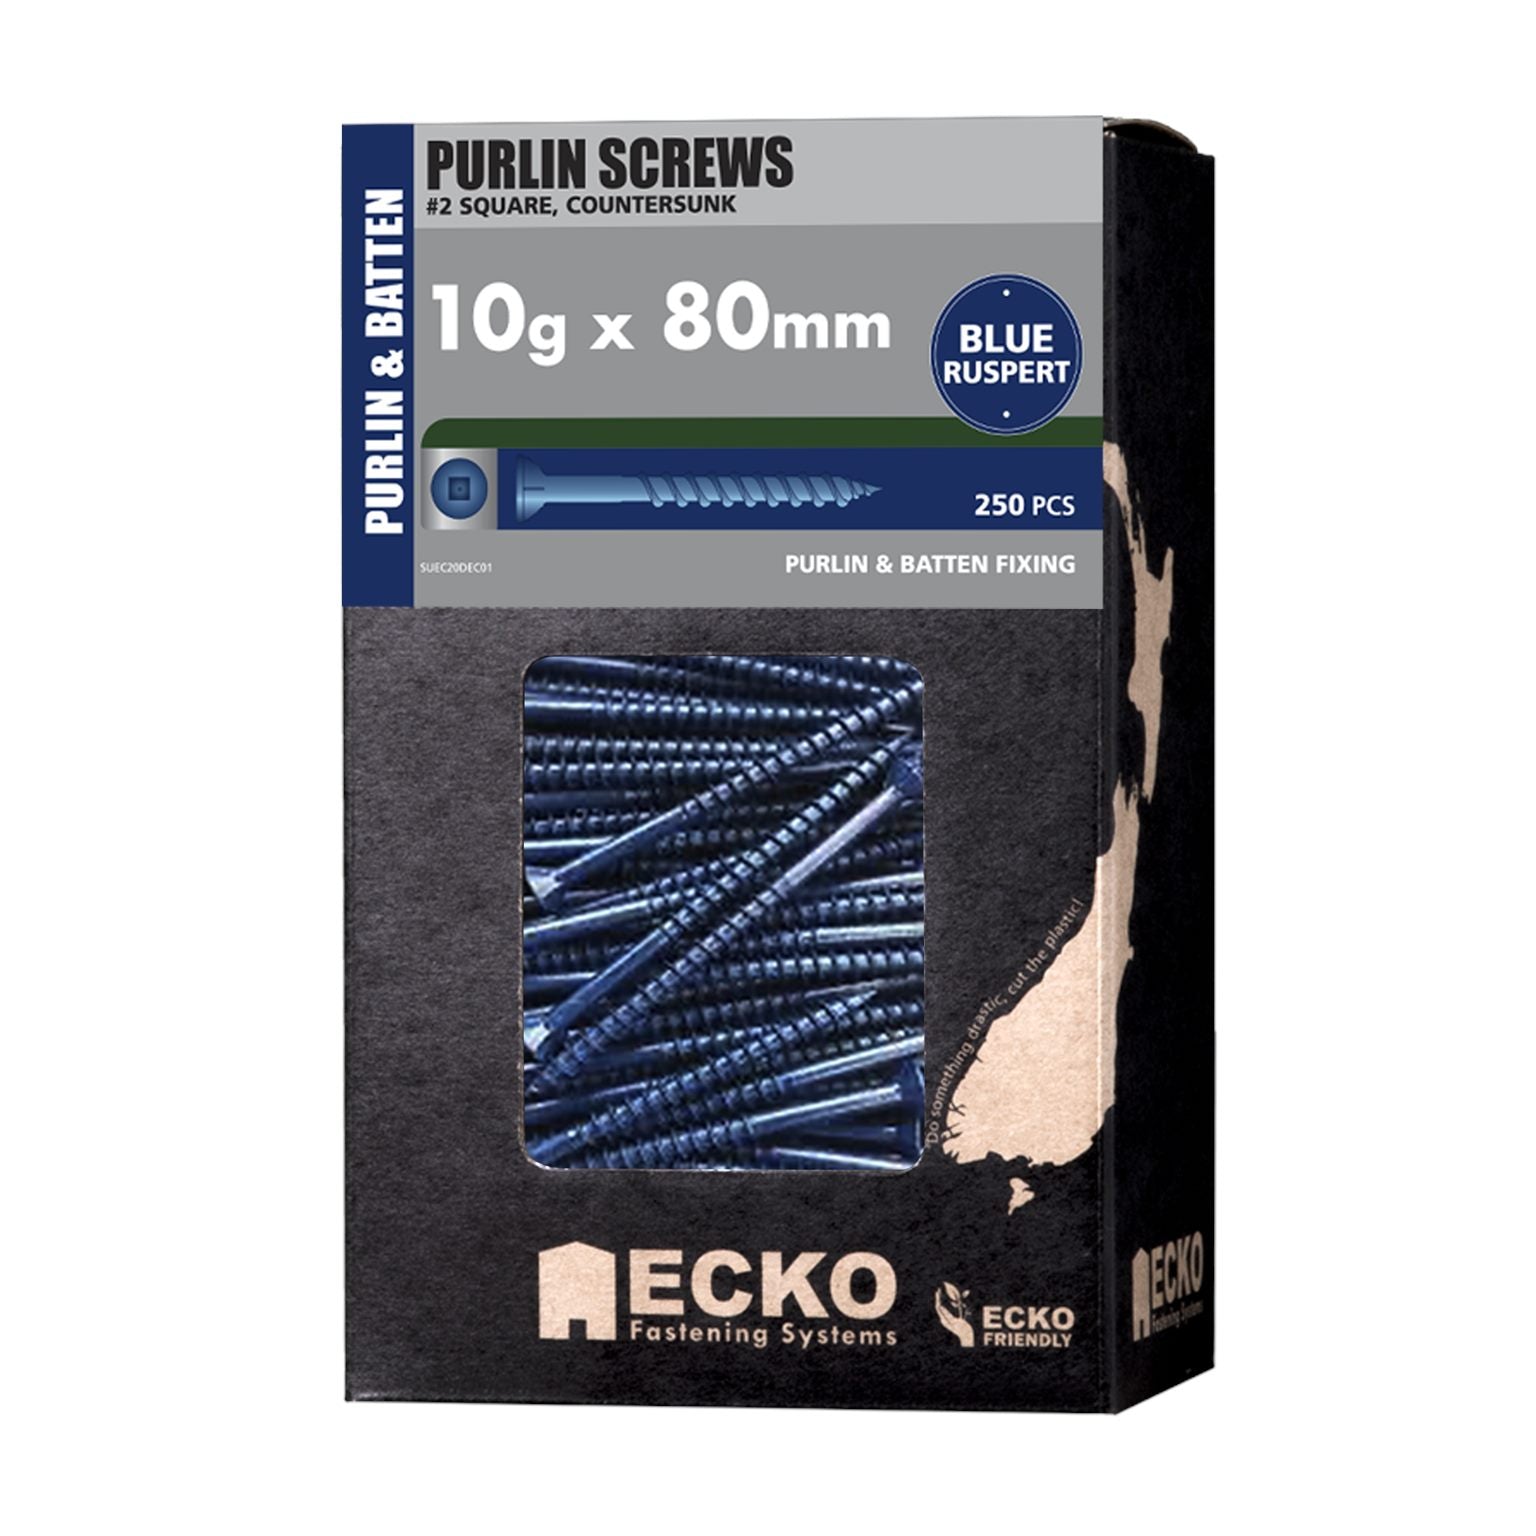 Ecko 10G X 80Mm Loose Purlin Screws (250 Box) 5 Outer